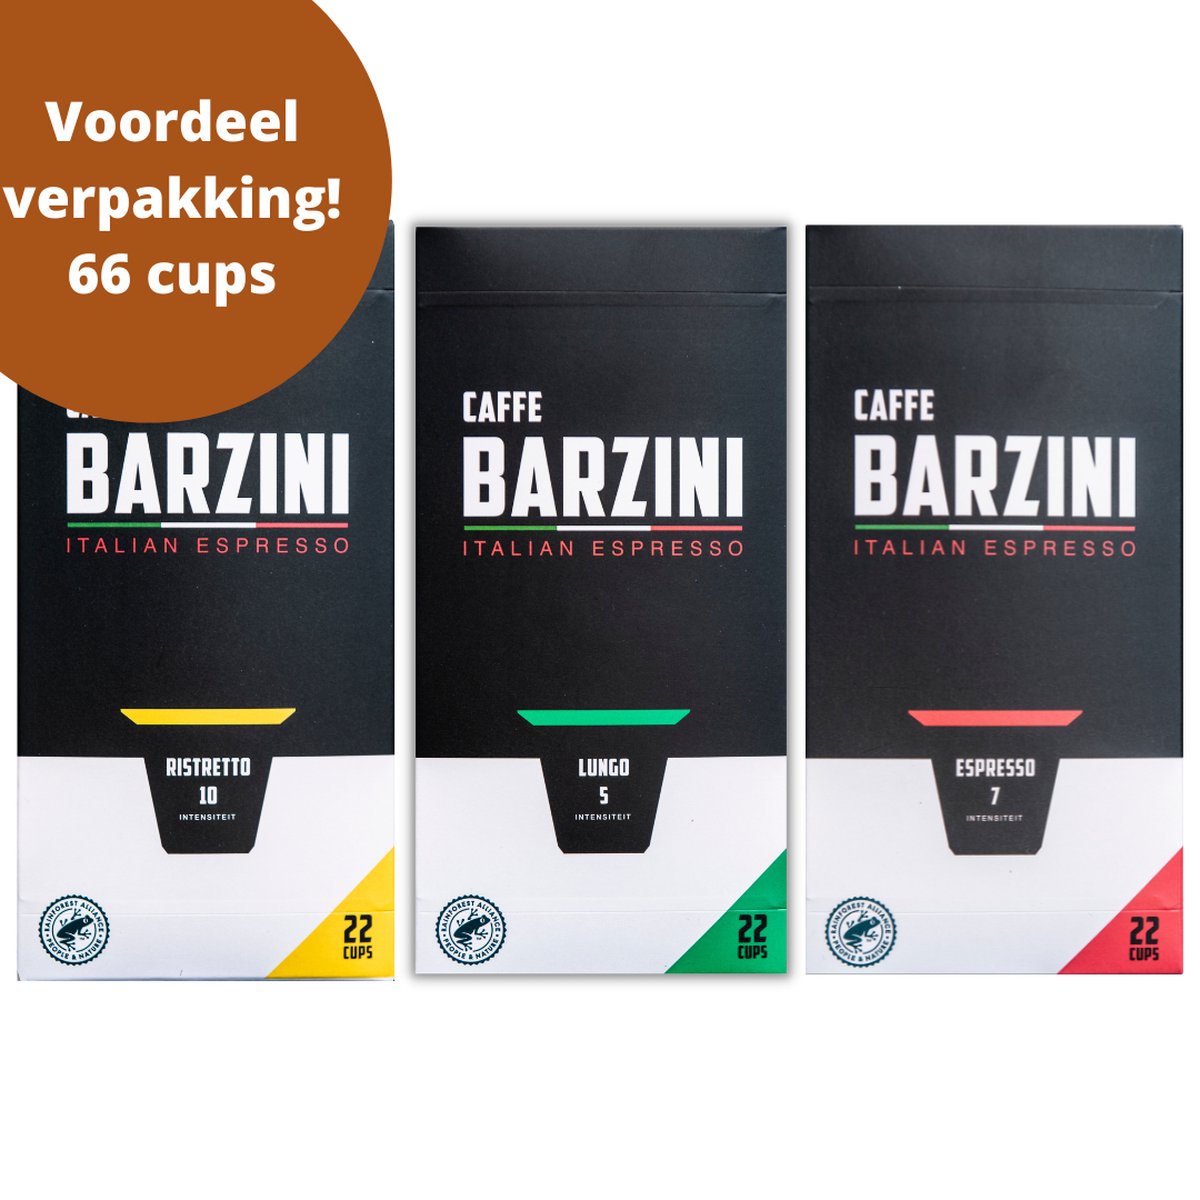 Barzini cups proefpakket - Ristretto, Lungo & Espresso Cups - 3x 22 capsules - Totaal 66 capsules - 100% Rainforest Alliance koffie cups - koffiecapsules